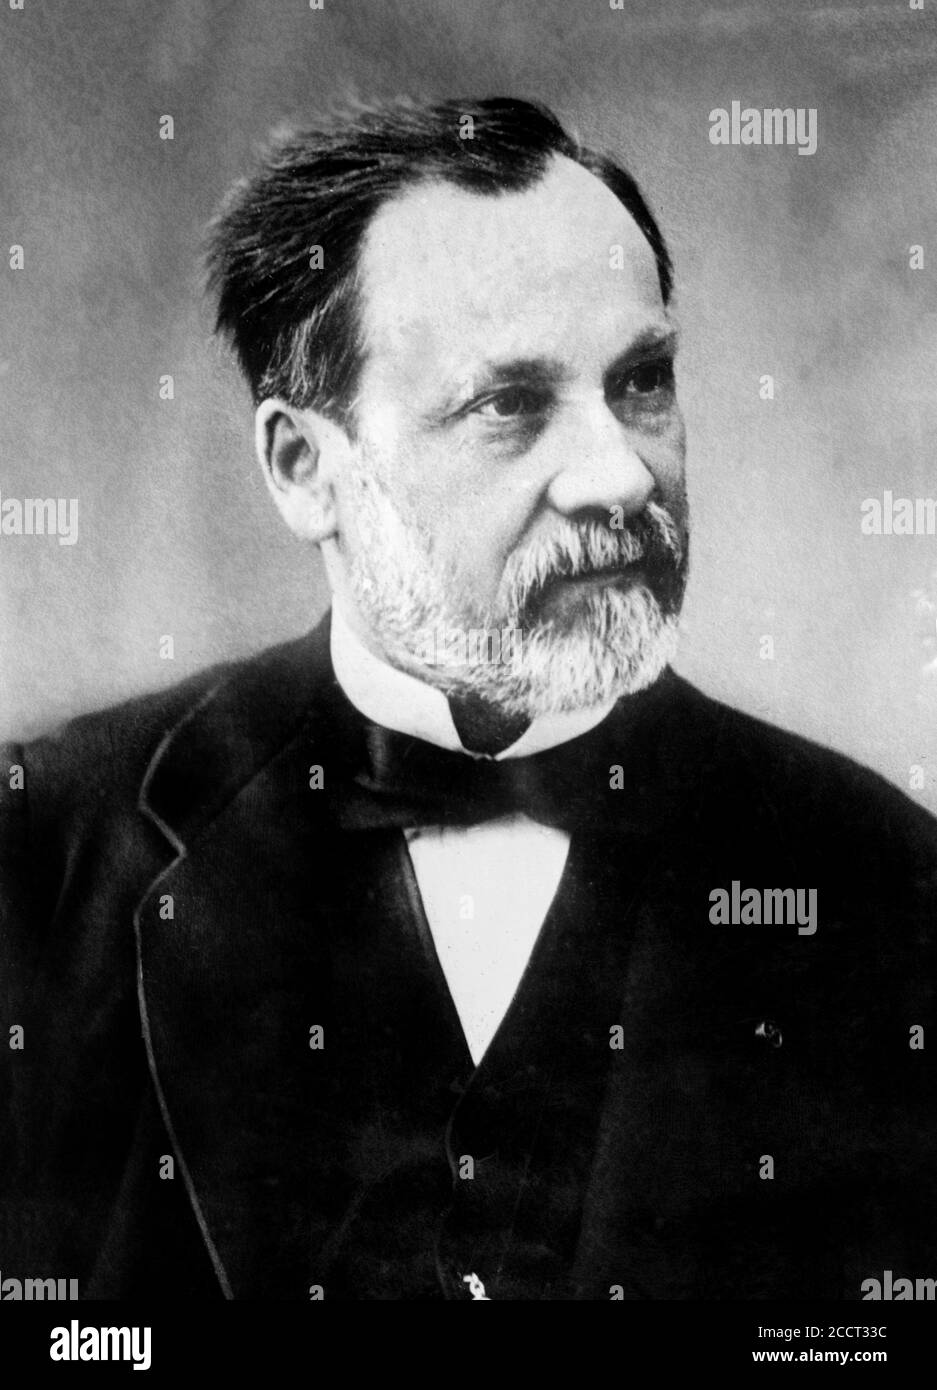 Portrait of Louis Pasteur (1822-1895). Pasteur was a French biologist, microbiologist, and chemist renowned for his discoveries of the principles of vaccination, microbial fermentation and pasteurisation. Photograph from Bains News Service, date unknown. Stock Photo